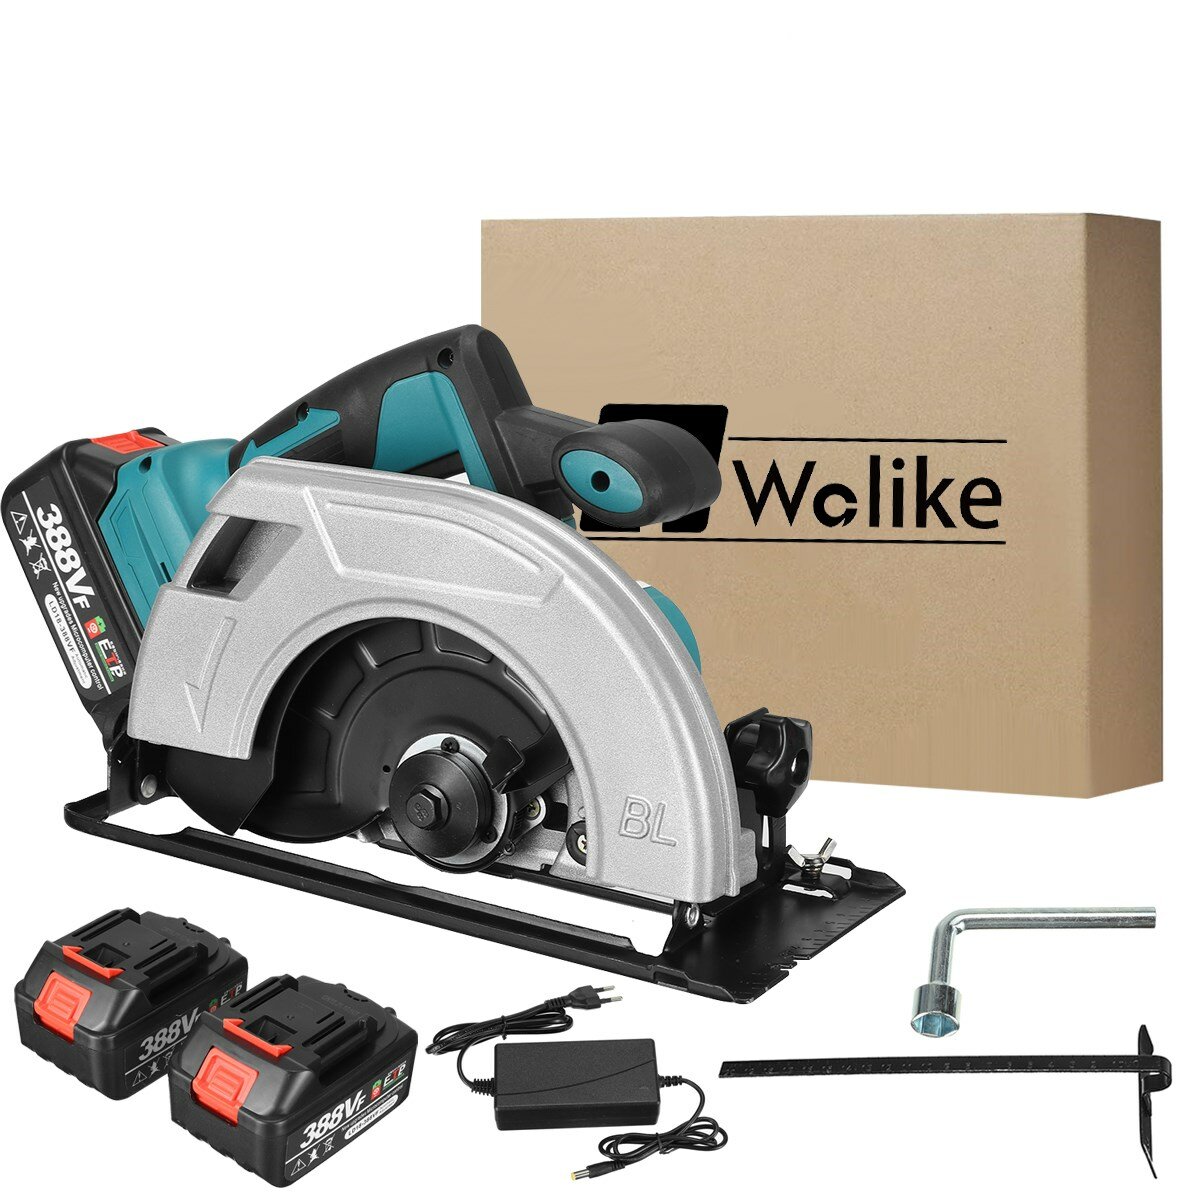 Image of 1200W Cordless Brushless Motor 185mm Circular Saw Handsaw with 1/2 18V Li-ion Battery